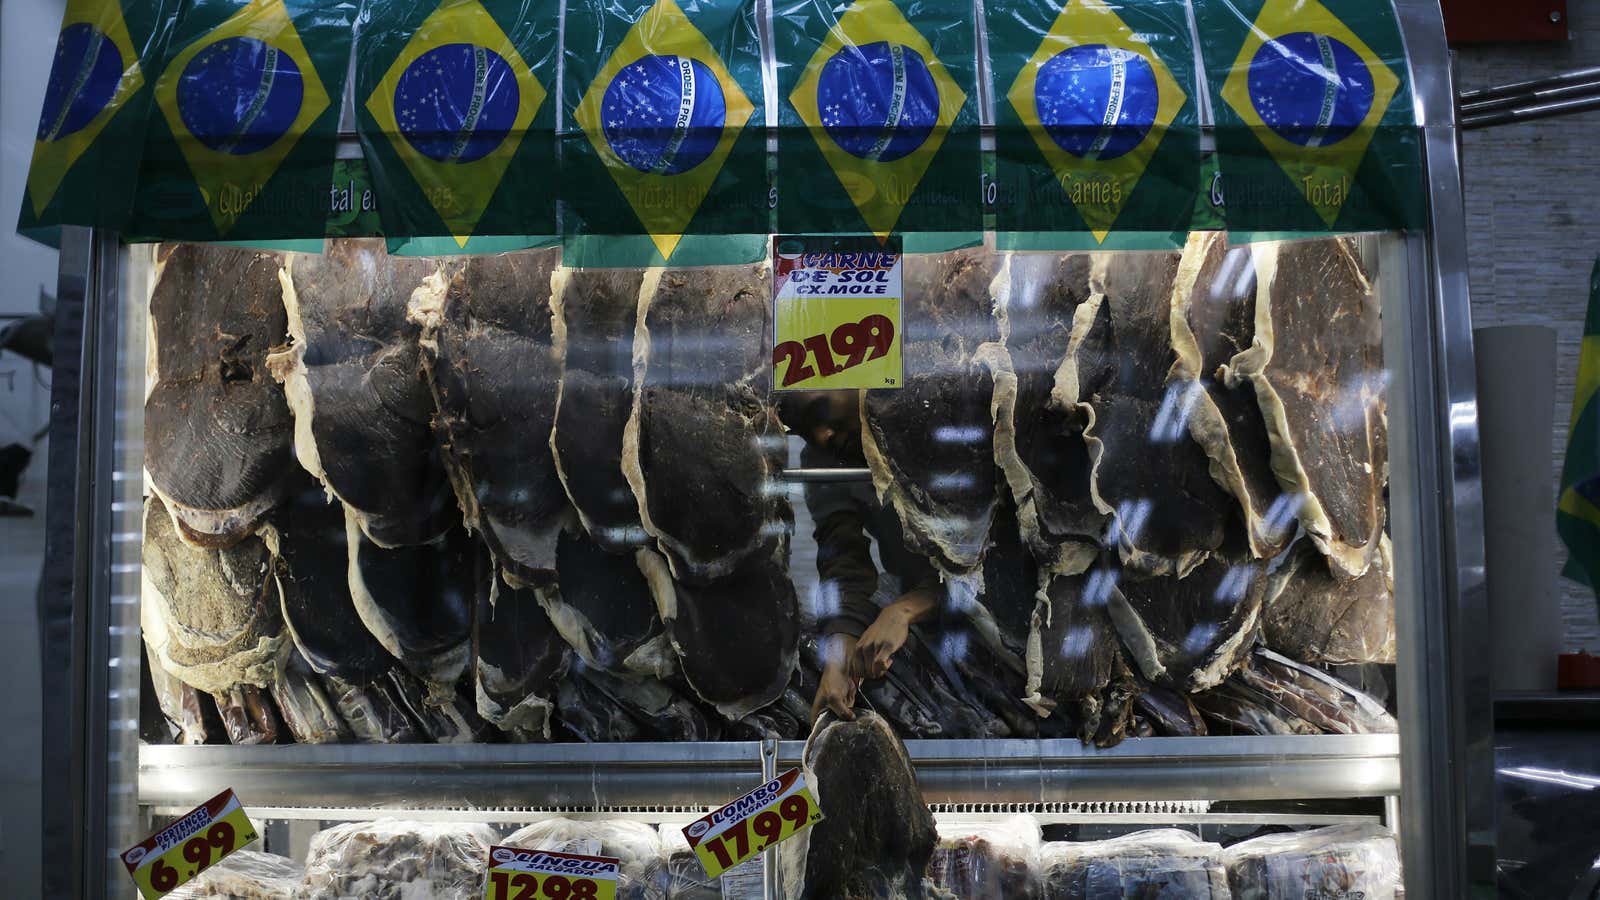 A vendor sells meat in Sao Paulo.